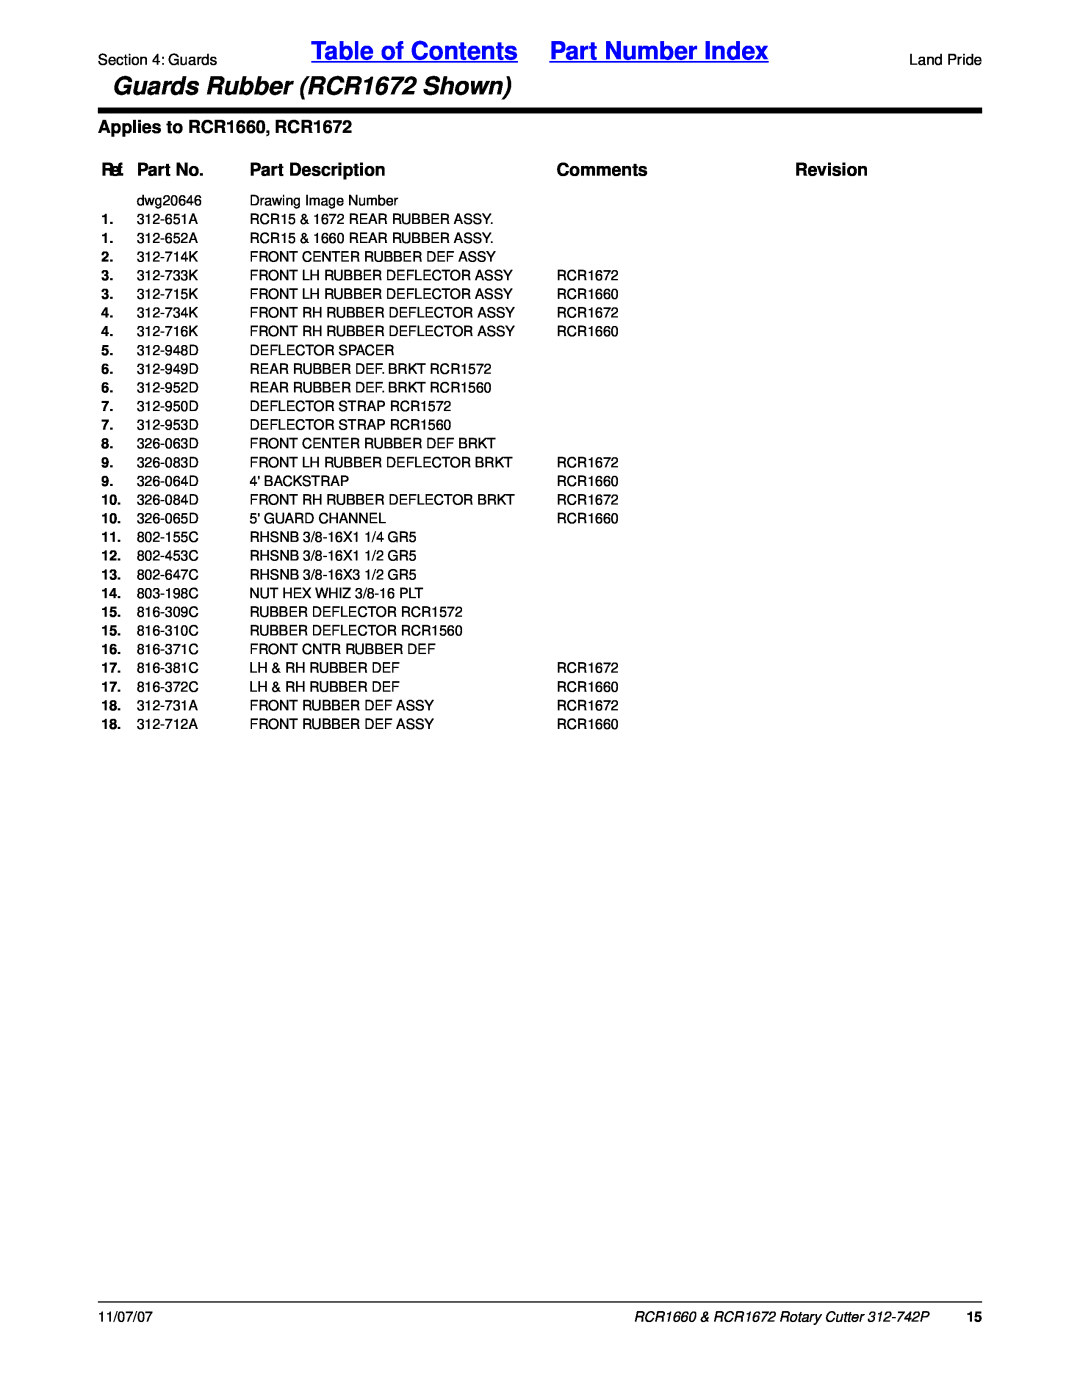 Land Pride Table of Contents Part Number Index, Guards Rubber RCR1672 Shown, Applies to RCR1660, RCR1672, Ref. Part No 